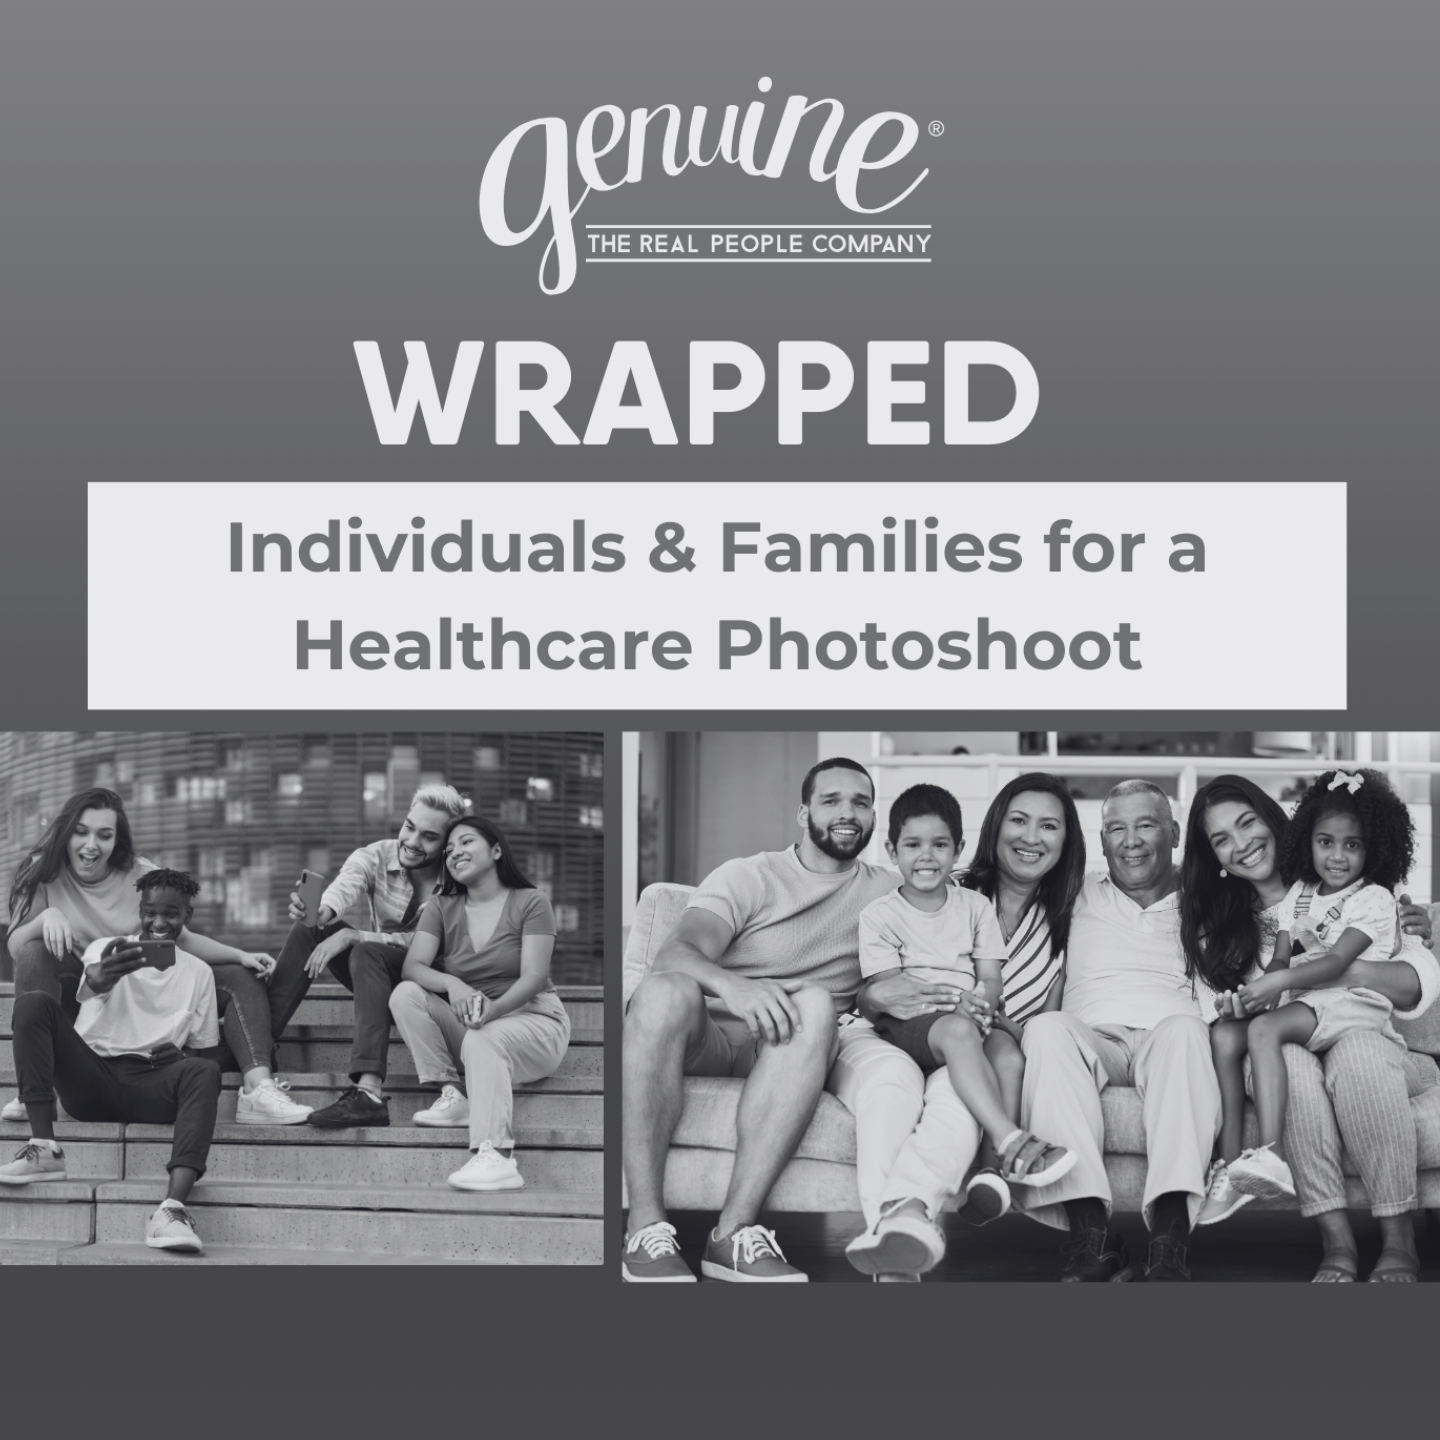 CASTING: Individuals & Families for a Healthcare Photoshoot